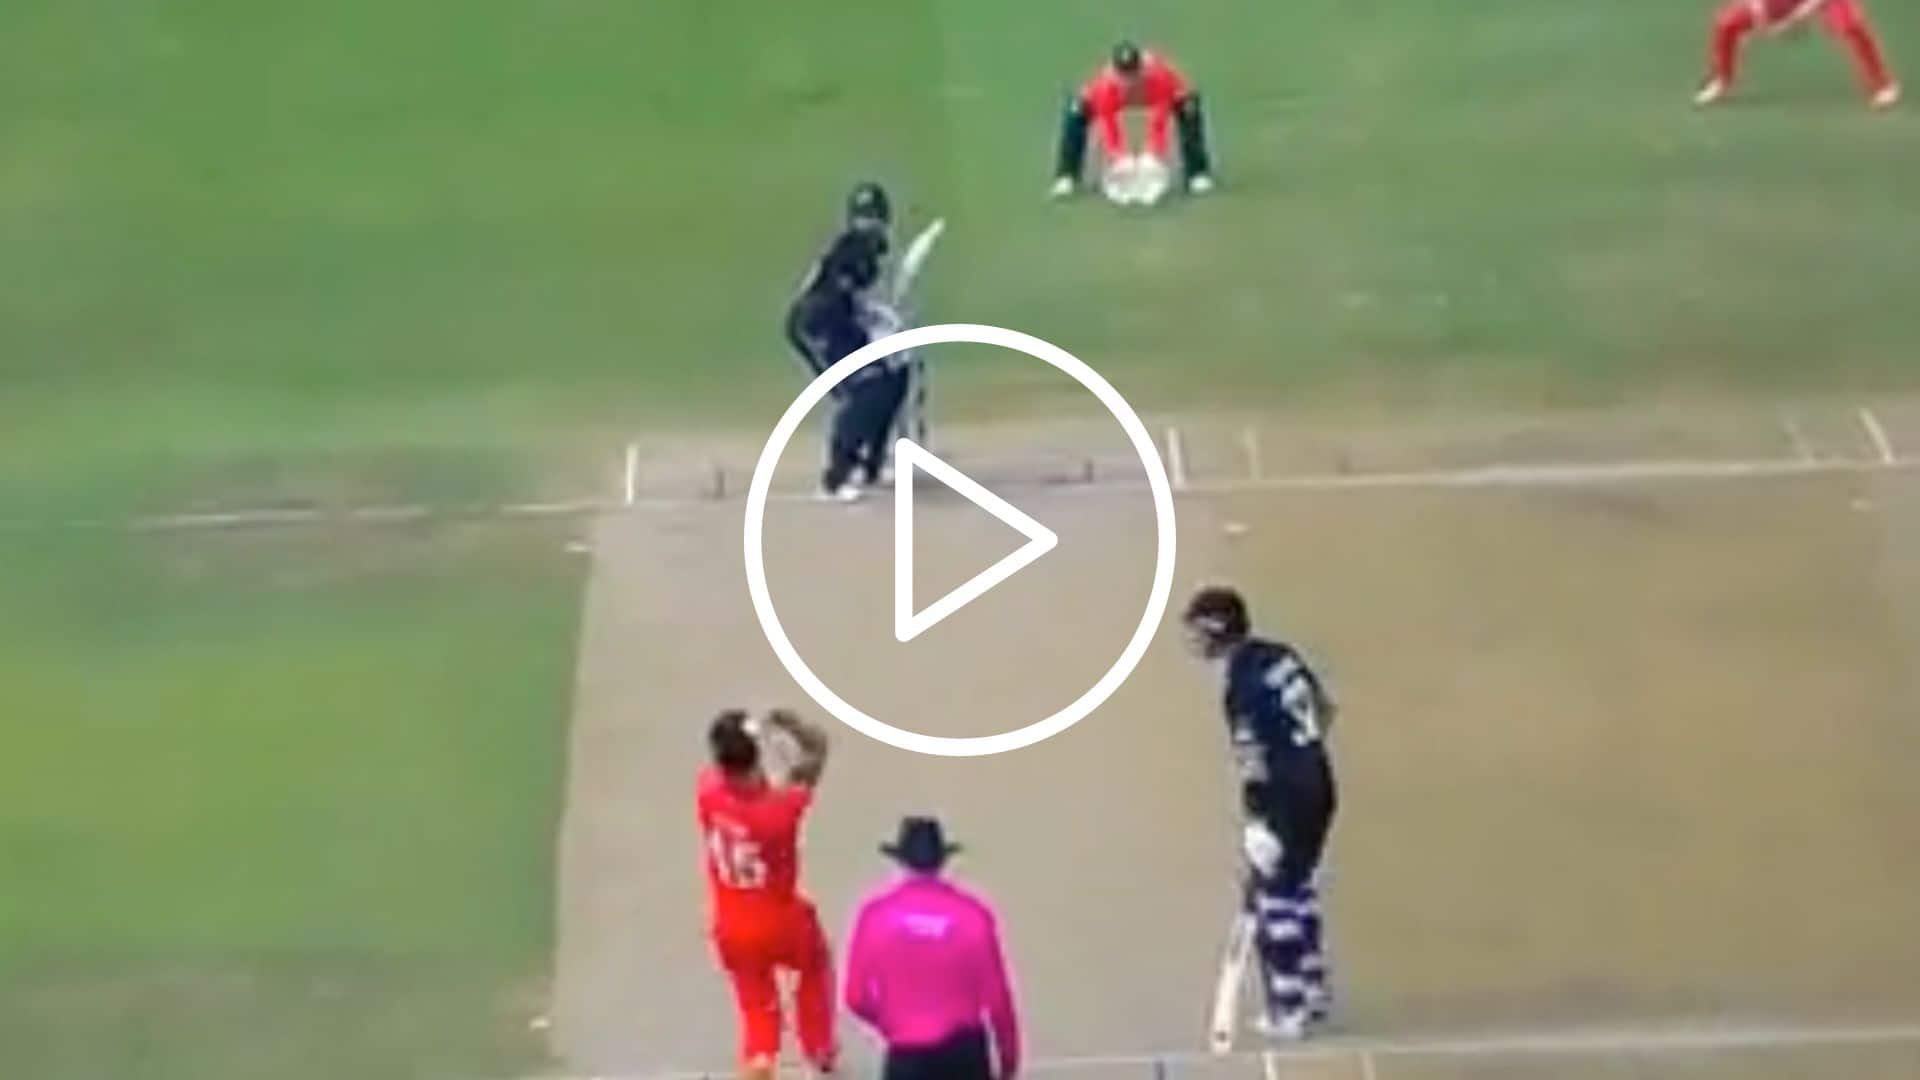 [Watch] Devon Conway Stuns Netherlands With Glorious Shot Through Extra Cover